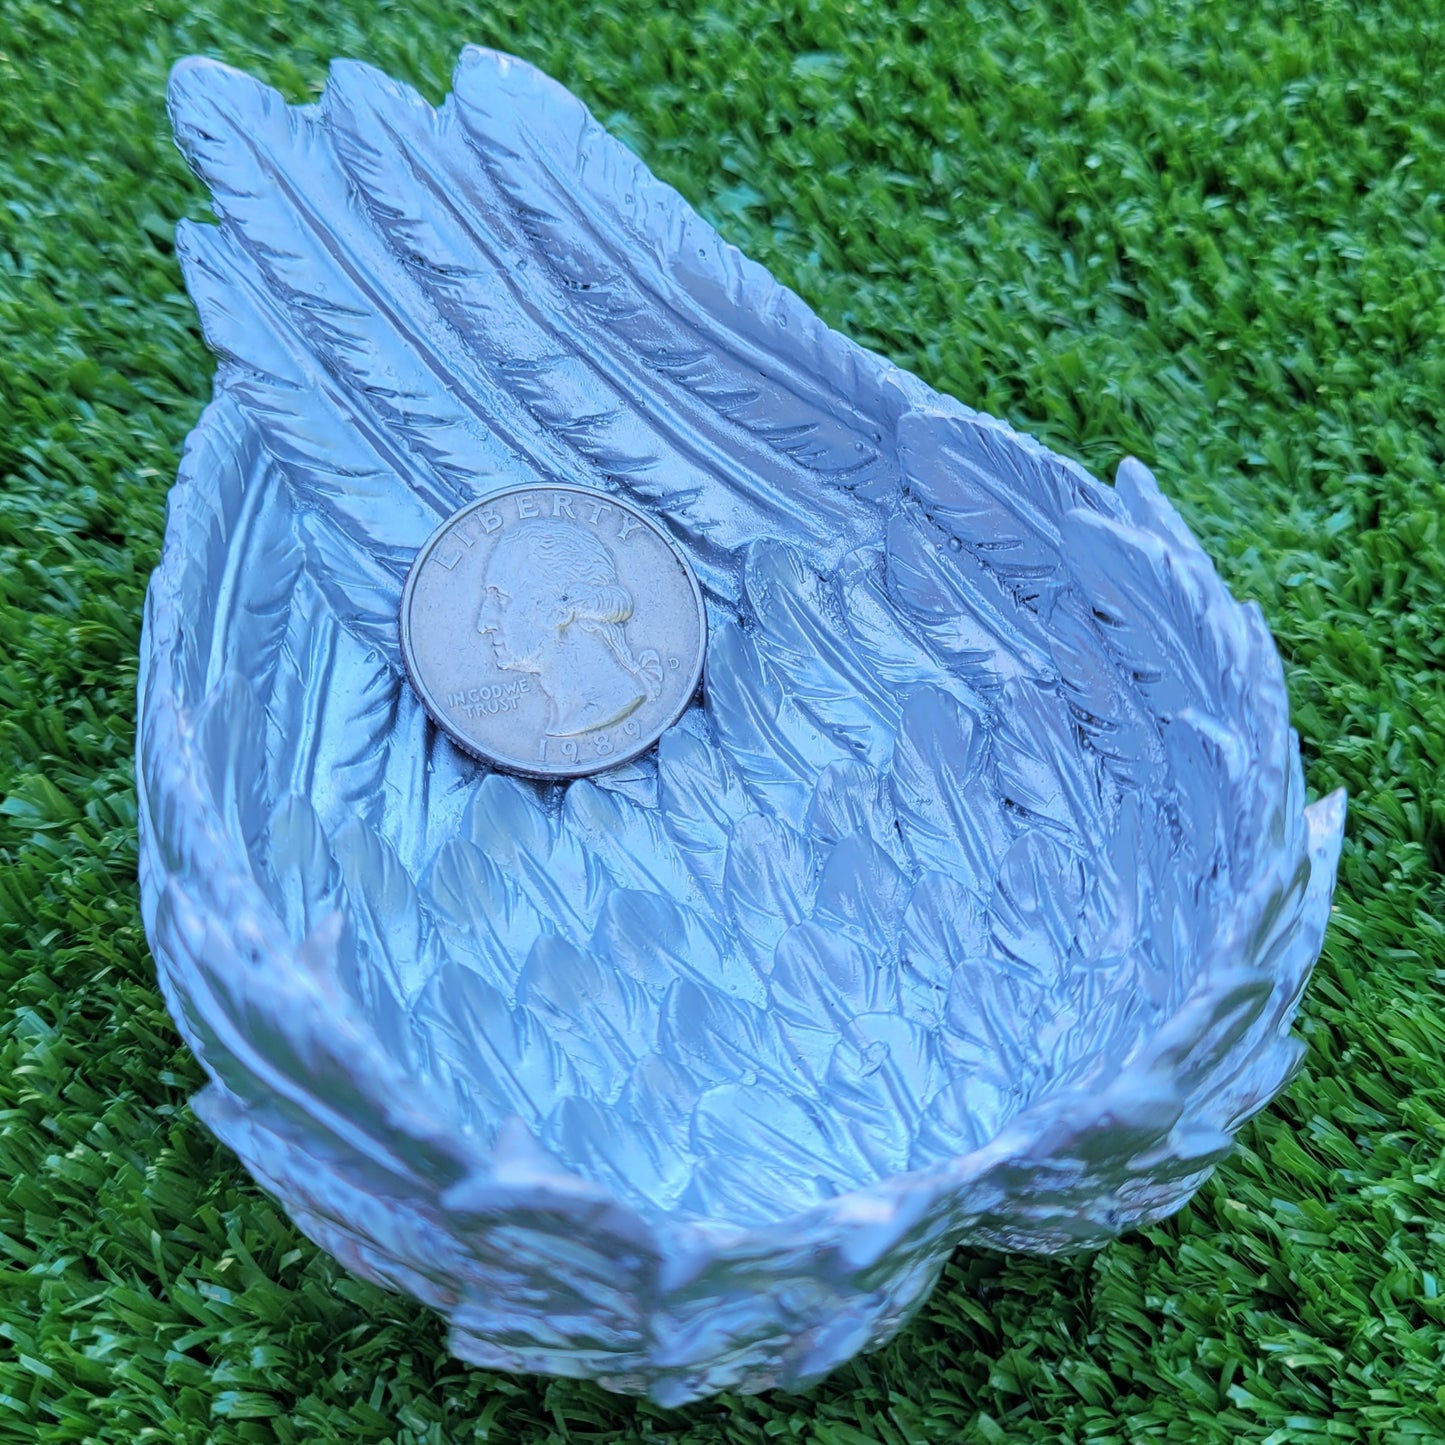 Angel Wings Heart Shaped Dish in Silver or White, for Crystal Balls and Other Treasures